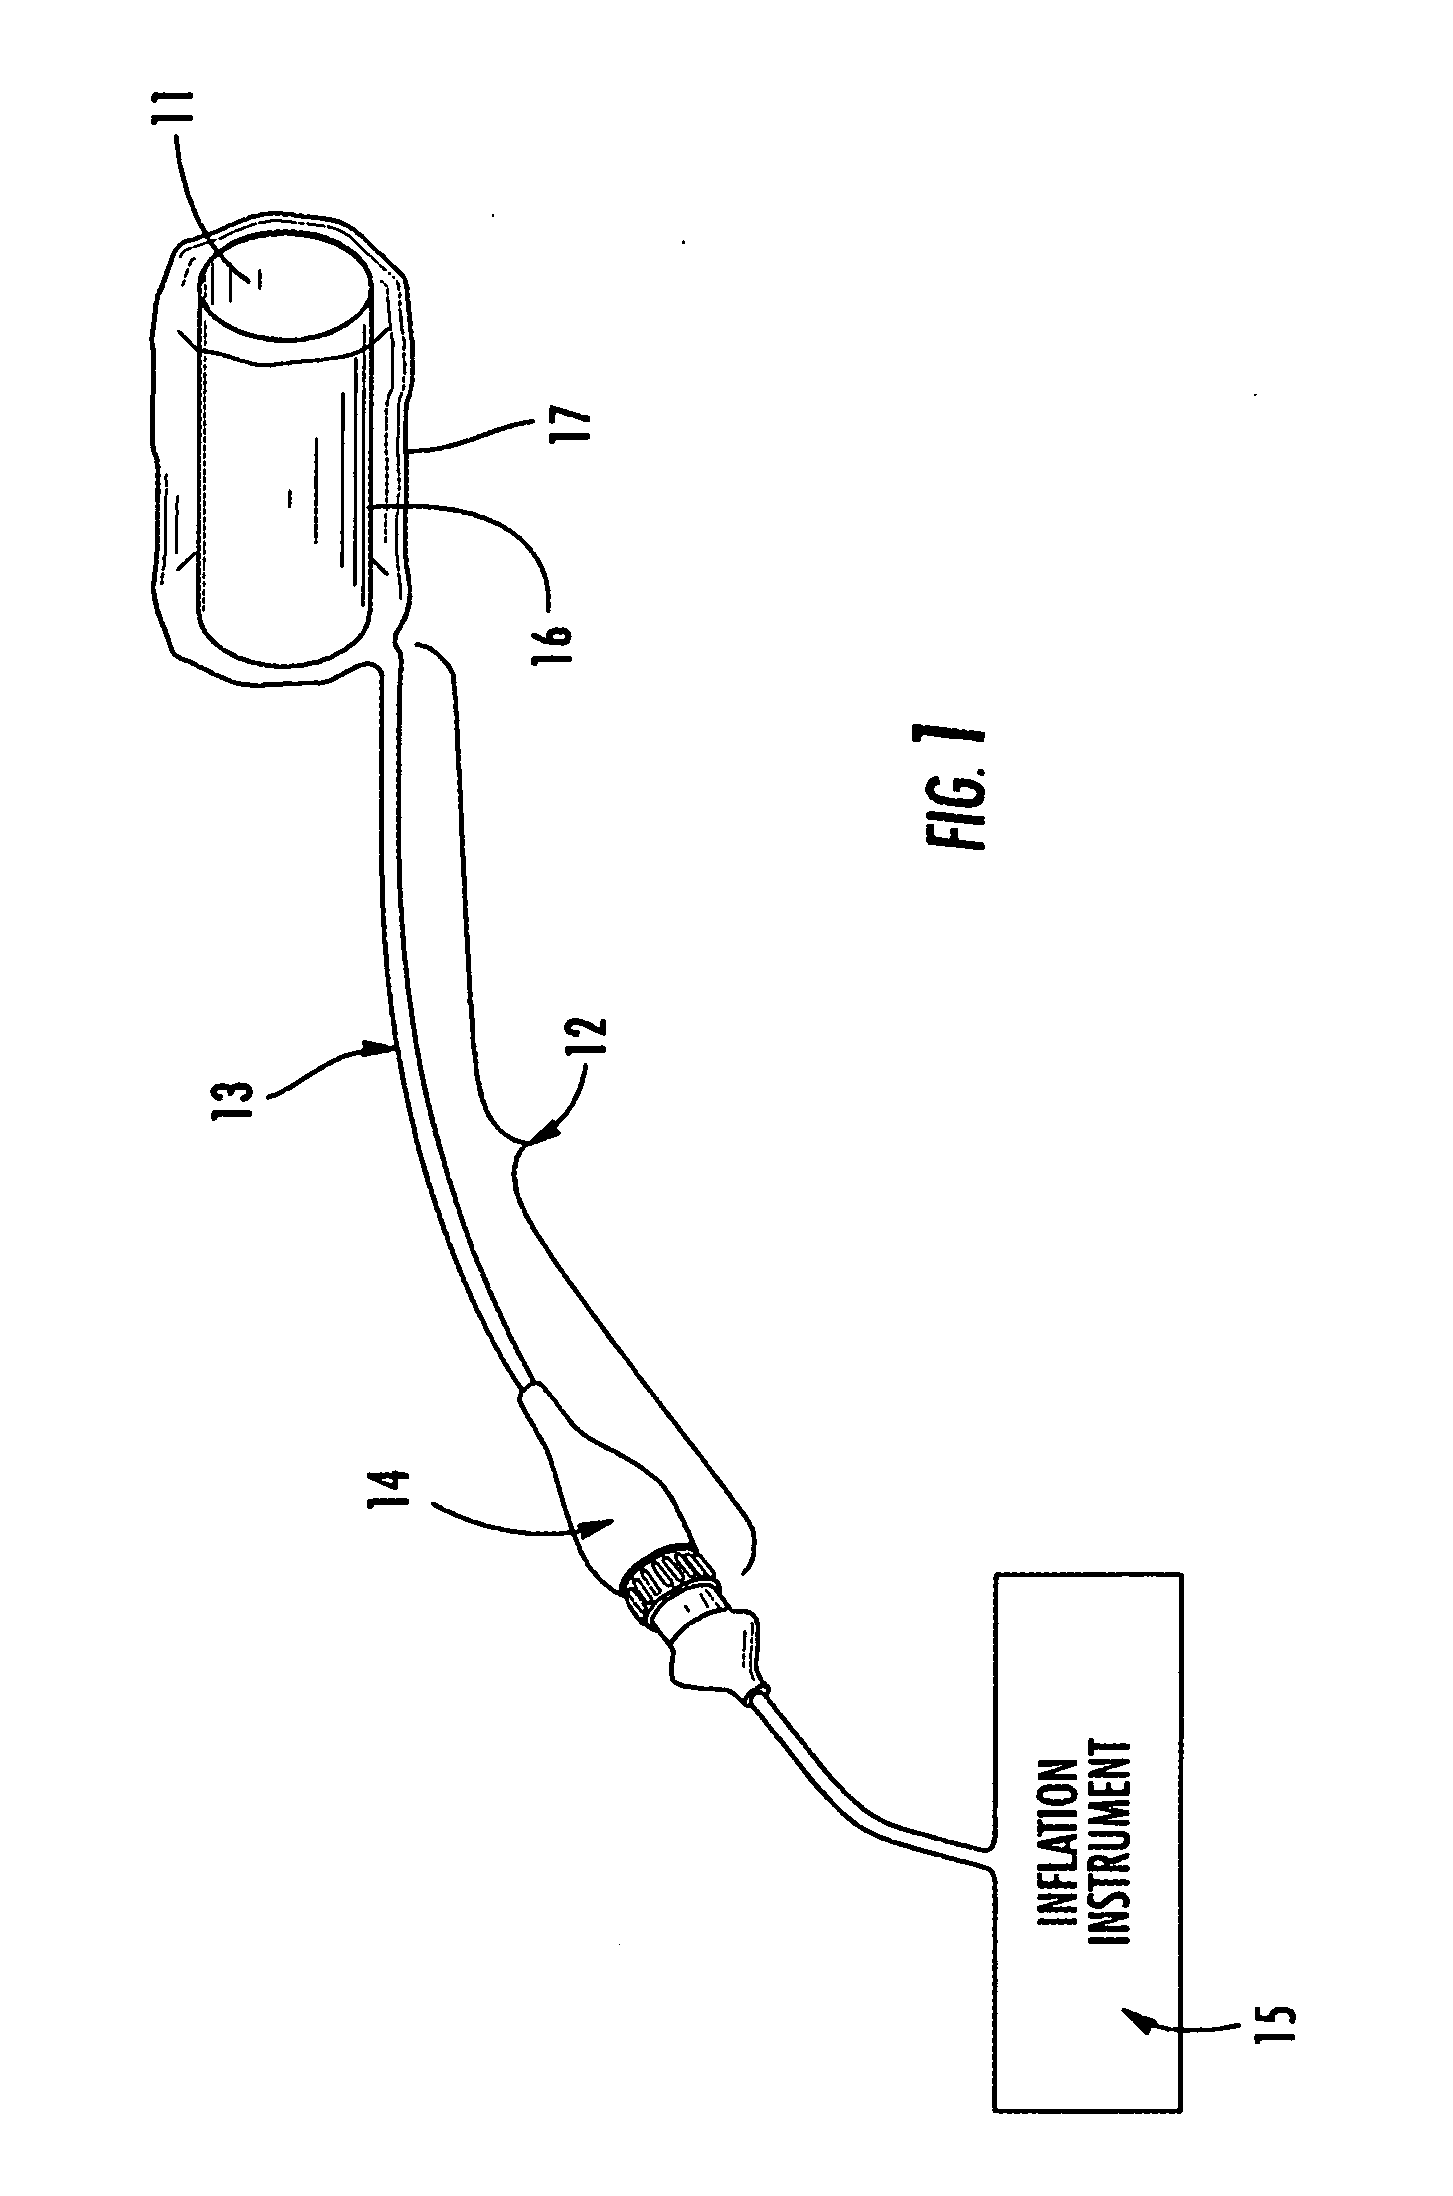 Device for sealing a body canal and method of use